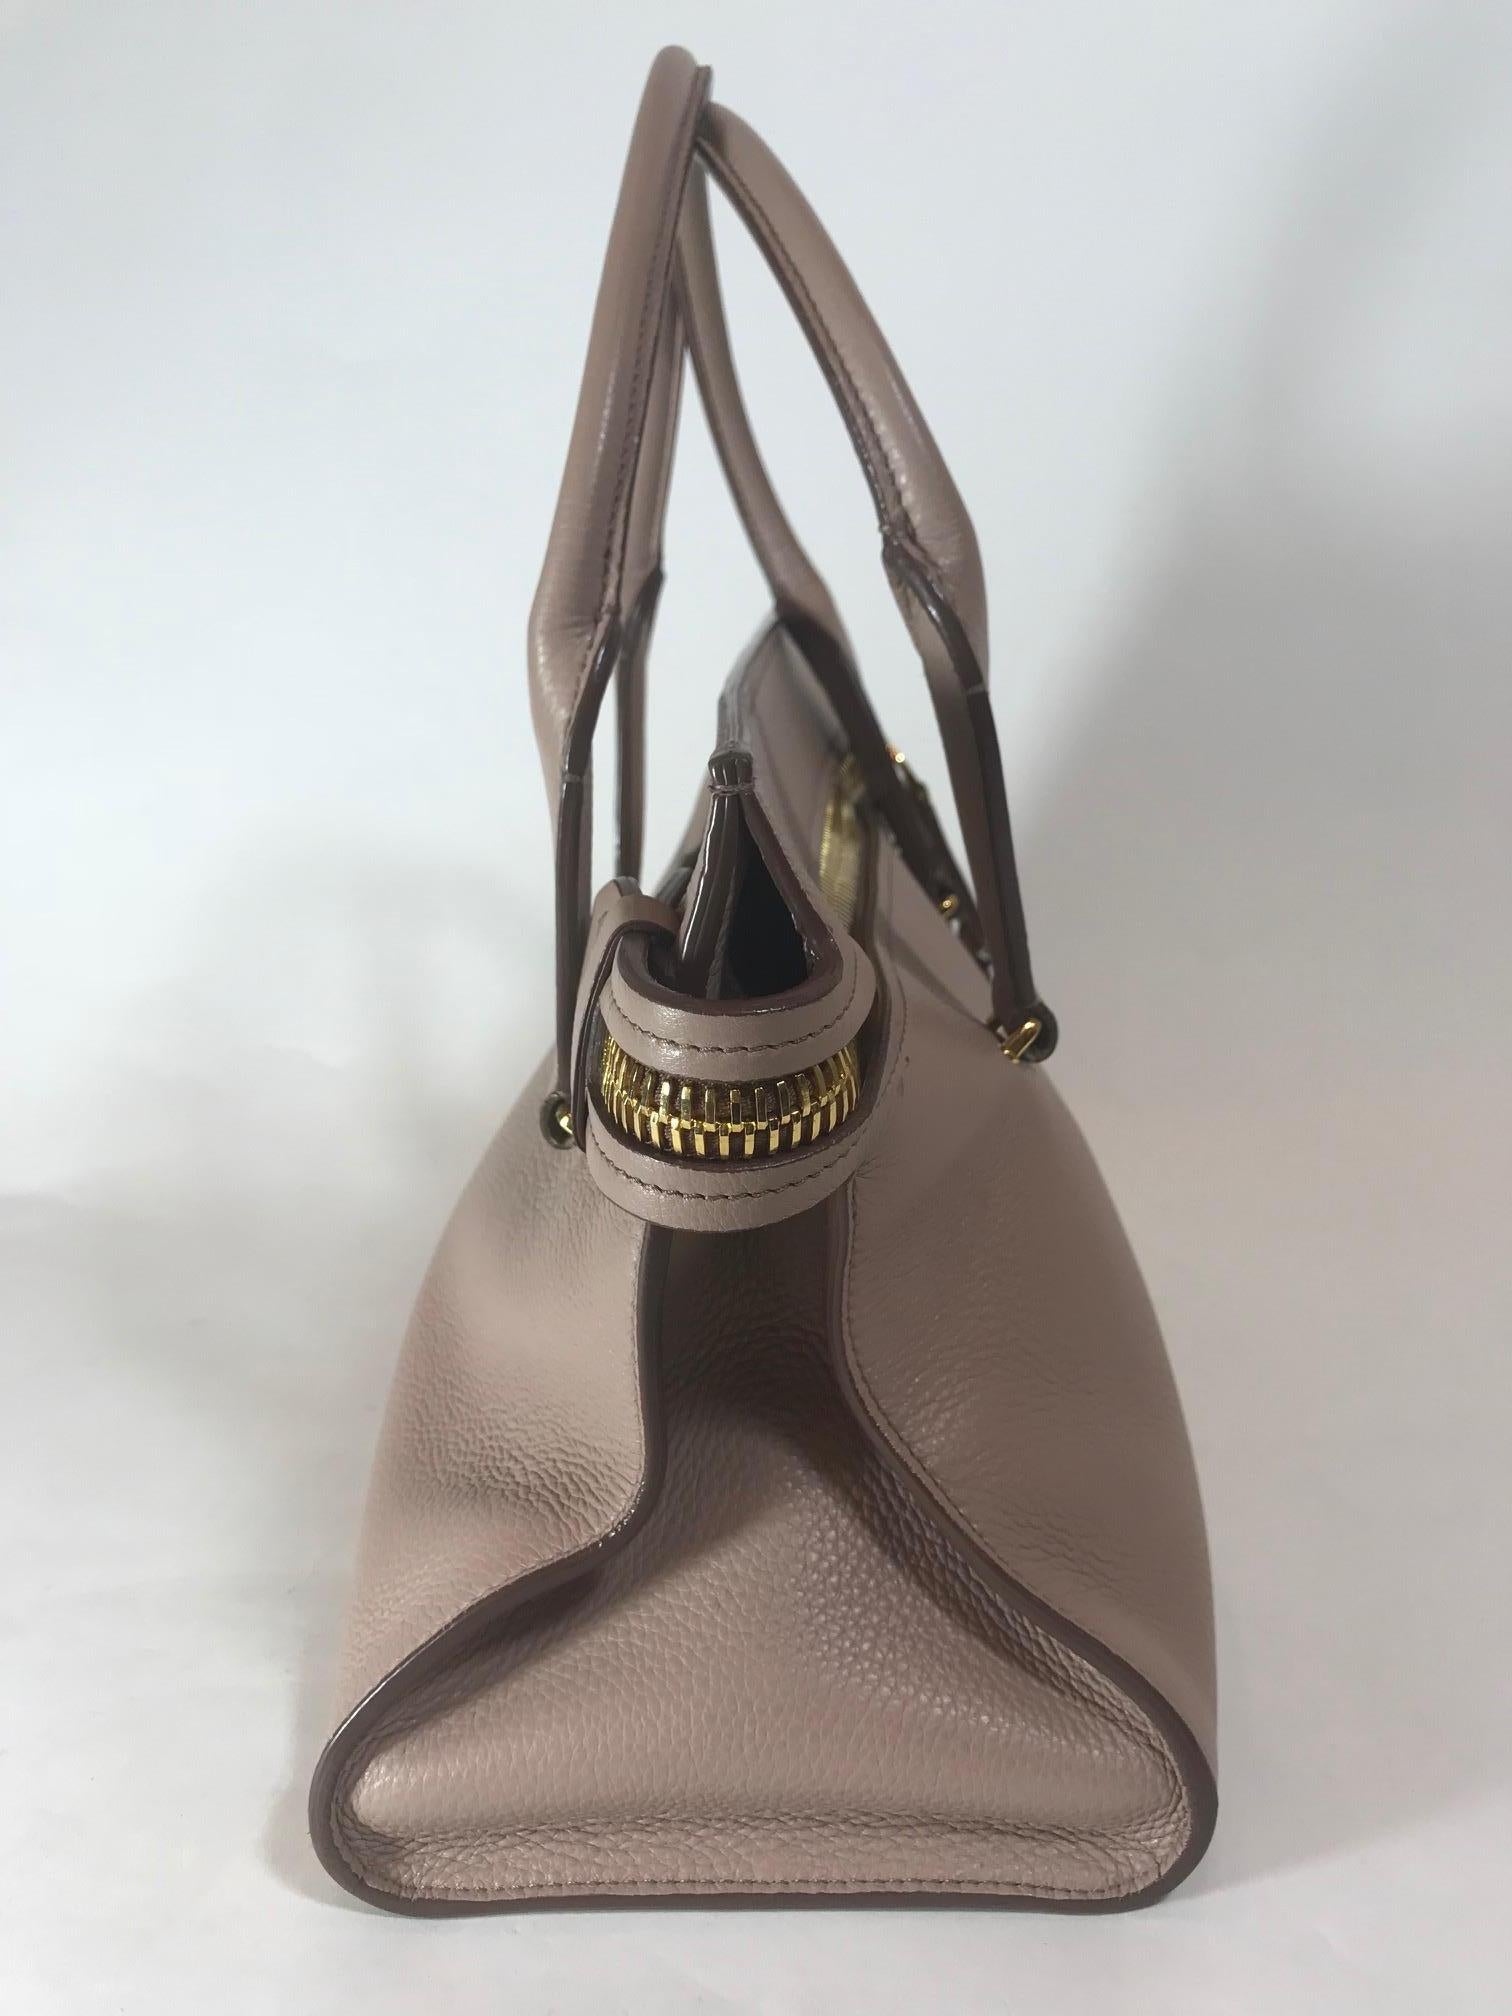 Tom Ford Grained Leather Tote In Good Condition For Sale In Roslyn, NY